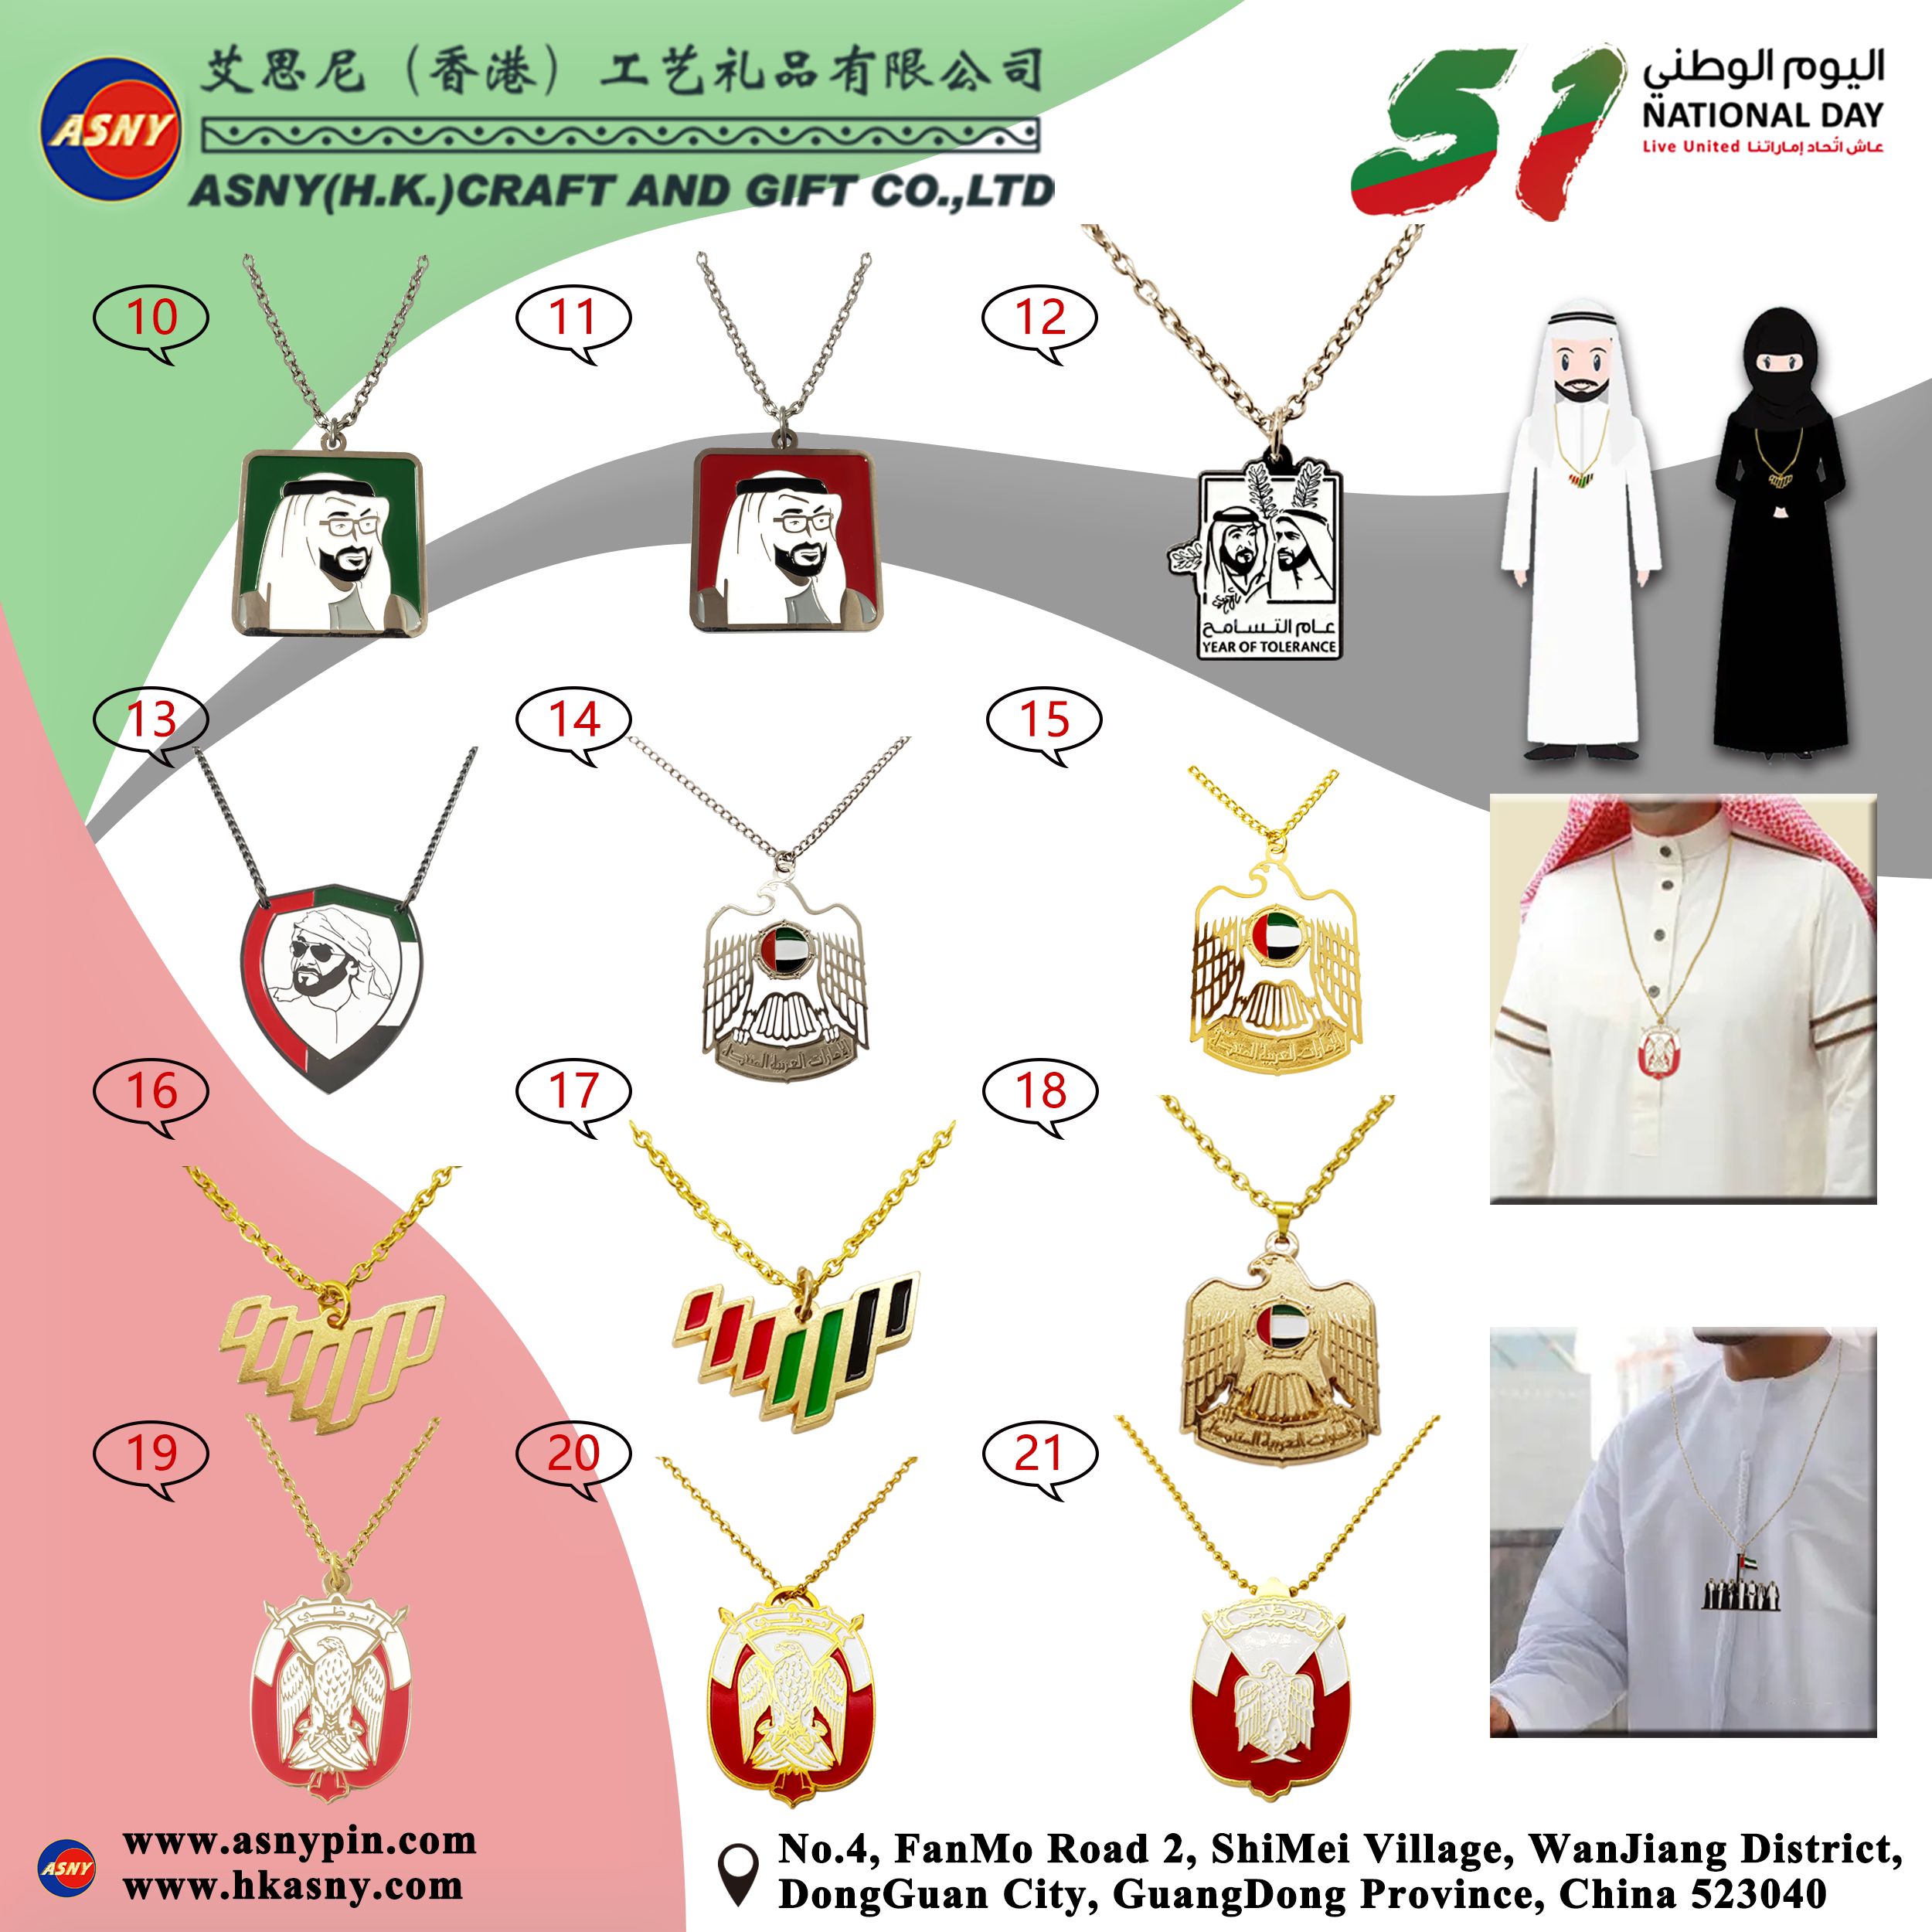 Product Catalog - UAE 51st National Day Collection (5)